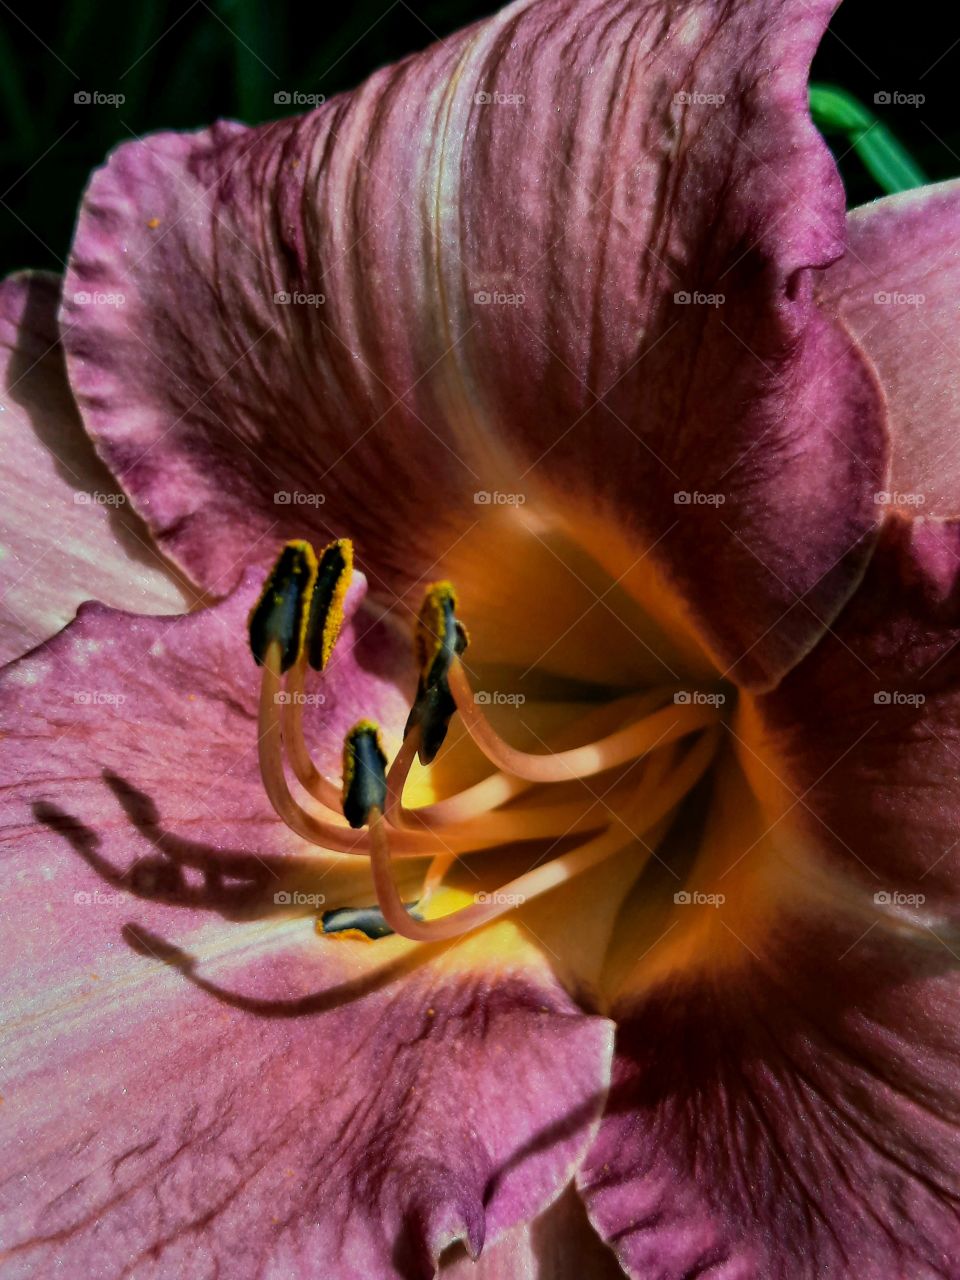 shadow of the anthers of the daylily flower